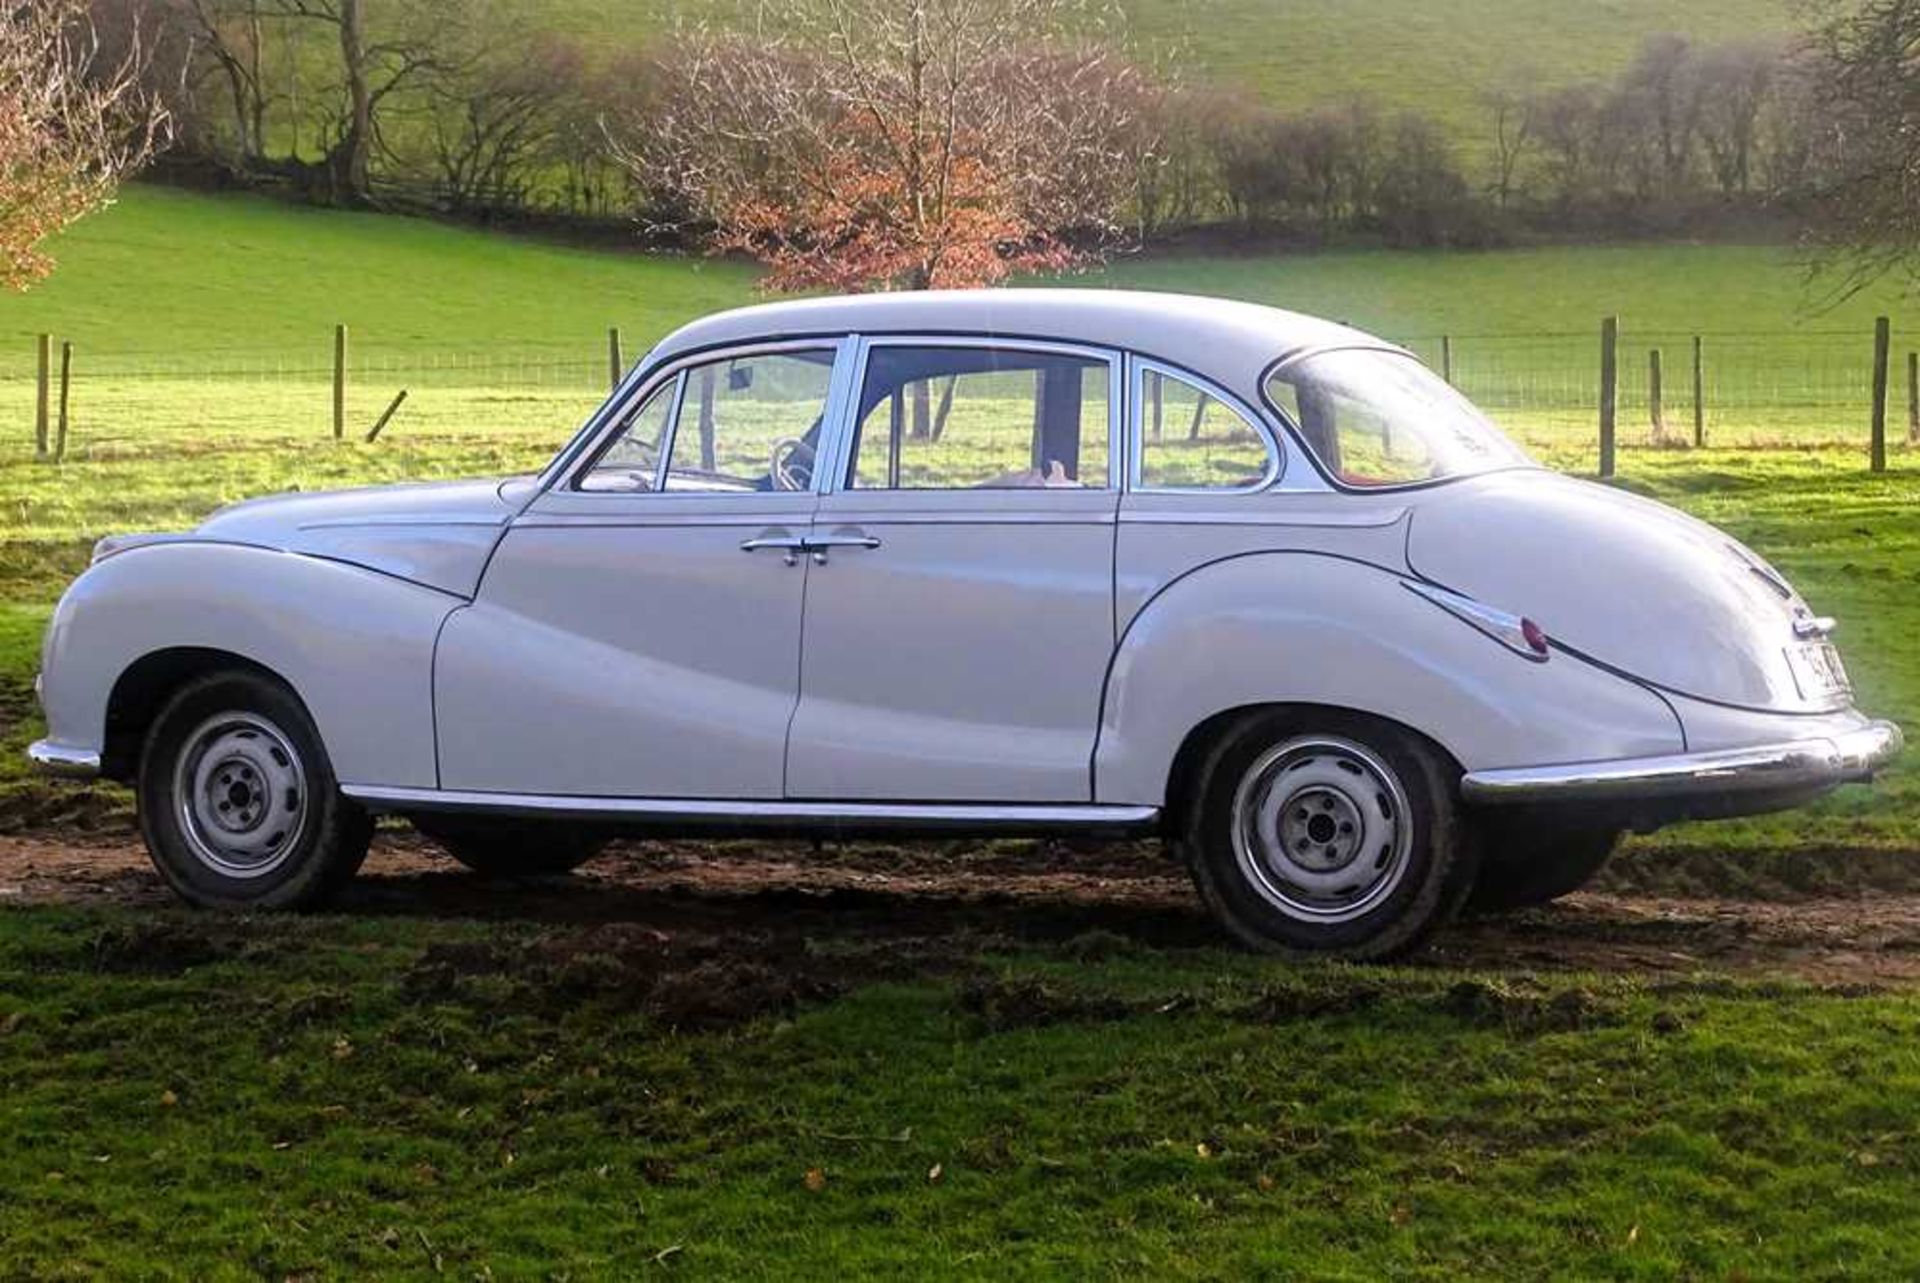 1957 BMW 502 Believed to be 1 of only 12 supplied new to the UK market - Image 32 of 64